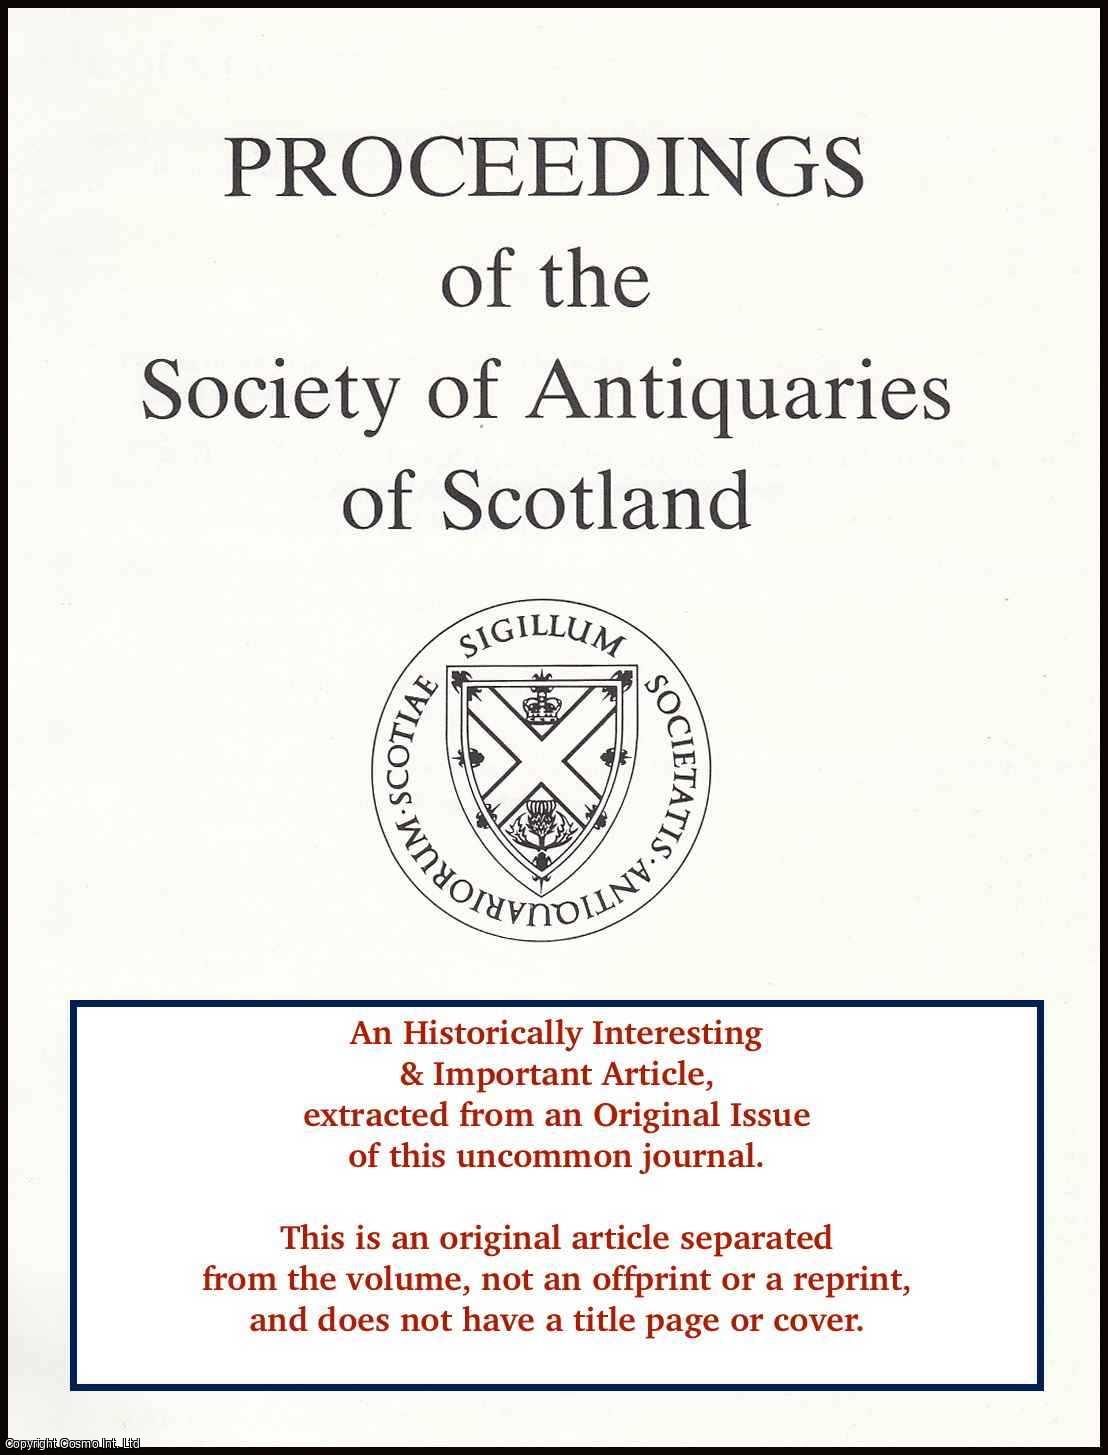 David H. Caldwell - Lead Seal Matrices of The 16th and Early 17th Century. An original article from the Proceedings of the Society of Antiquaries of Scotland, 1993.